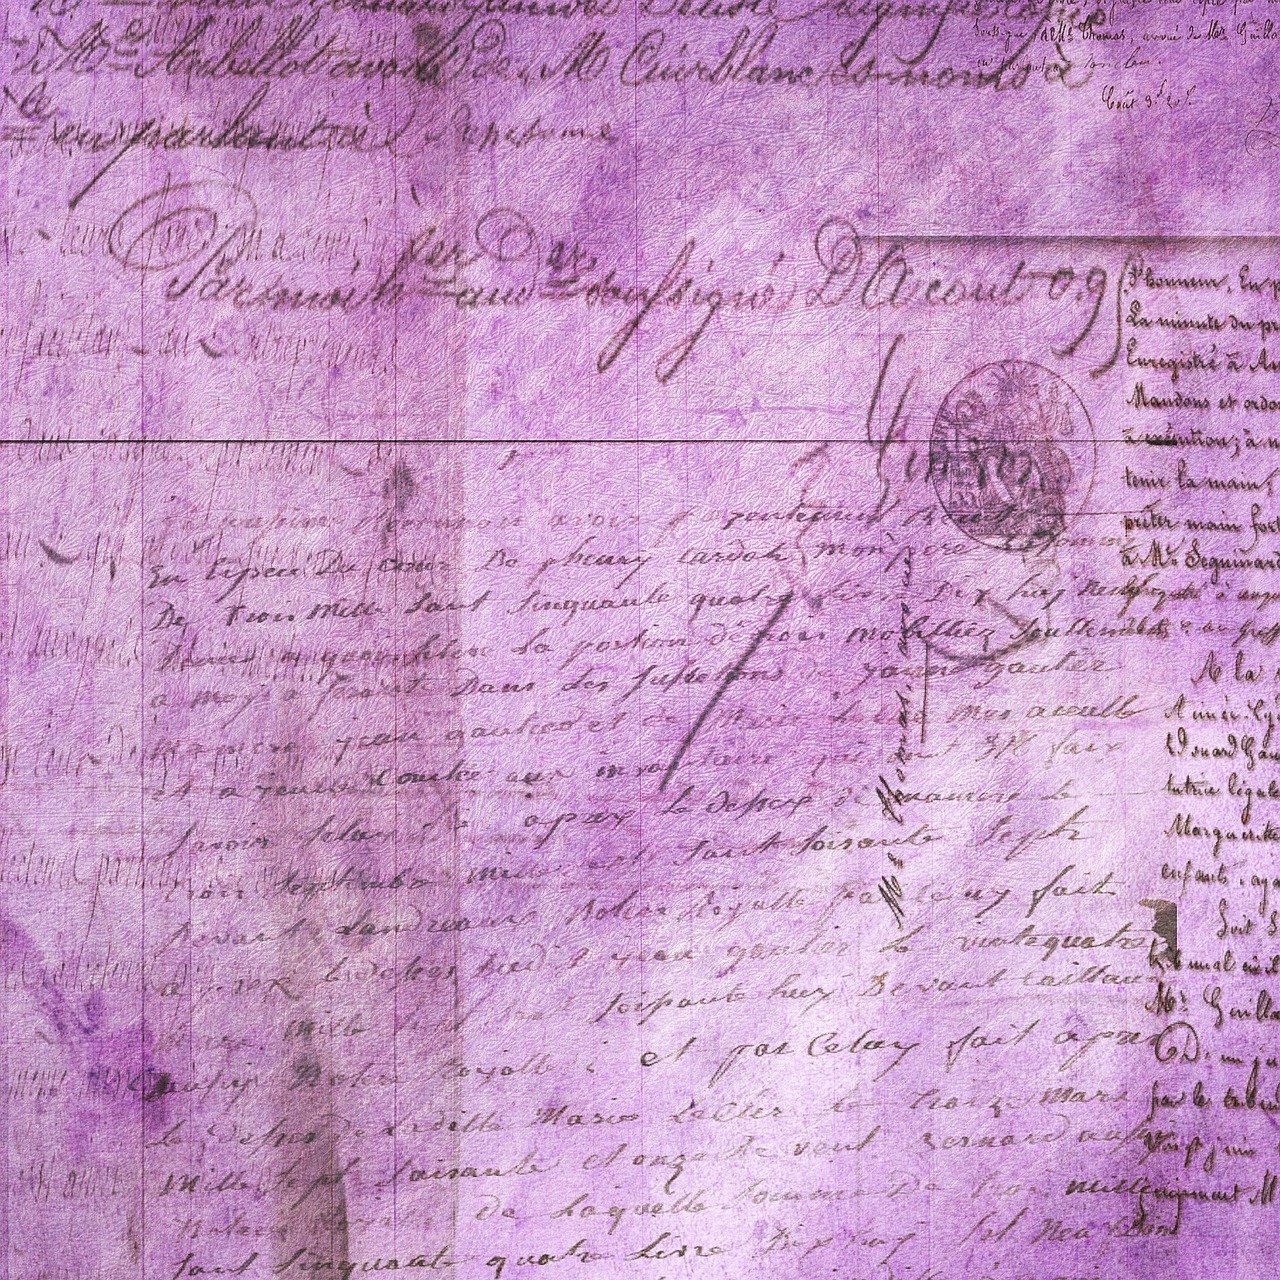 a close up of a piece of paper with writing on it, a digital rendering, by Anna Füssli, shutterstock, baroque, violet colored theme, late 1 9 th century, ussr, very old photo